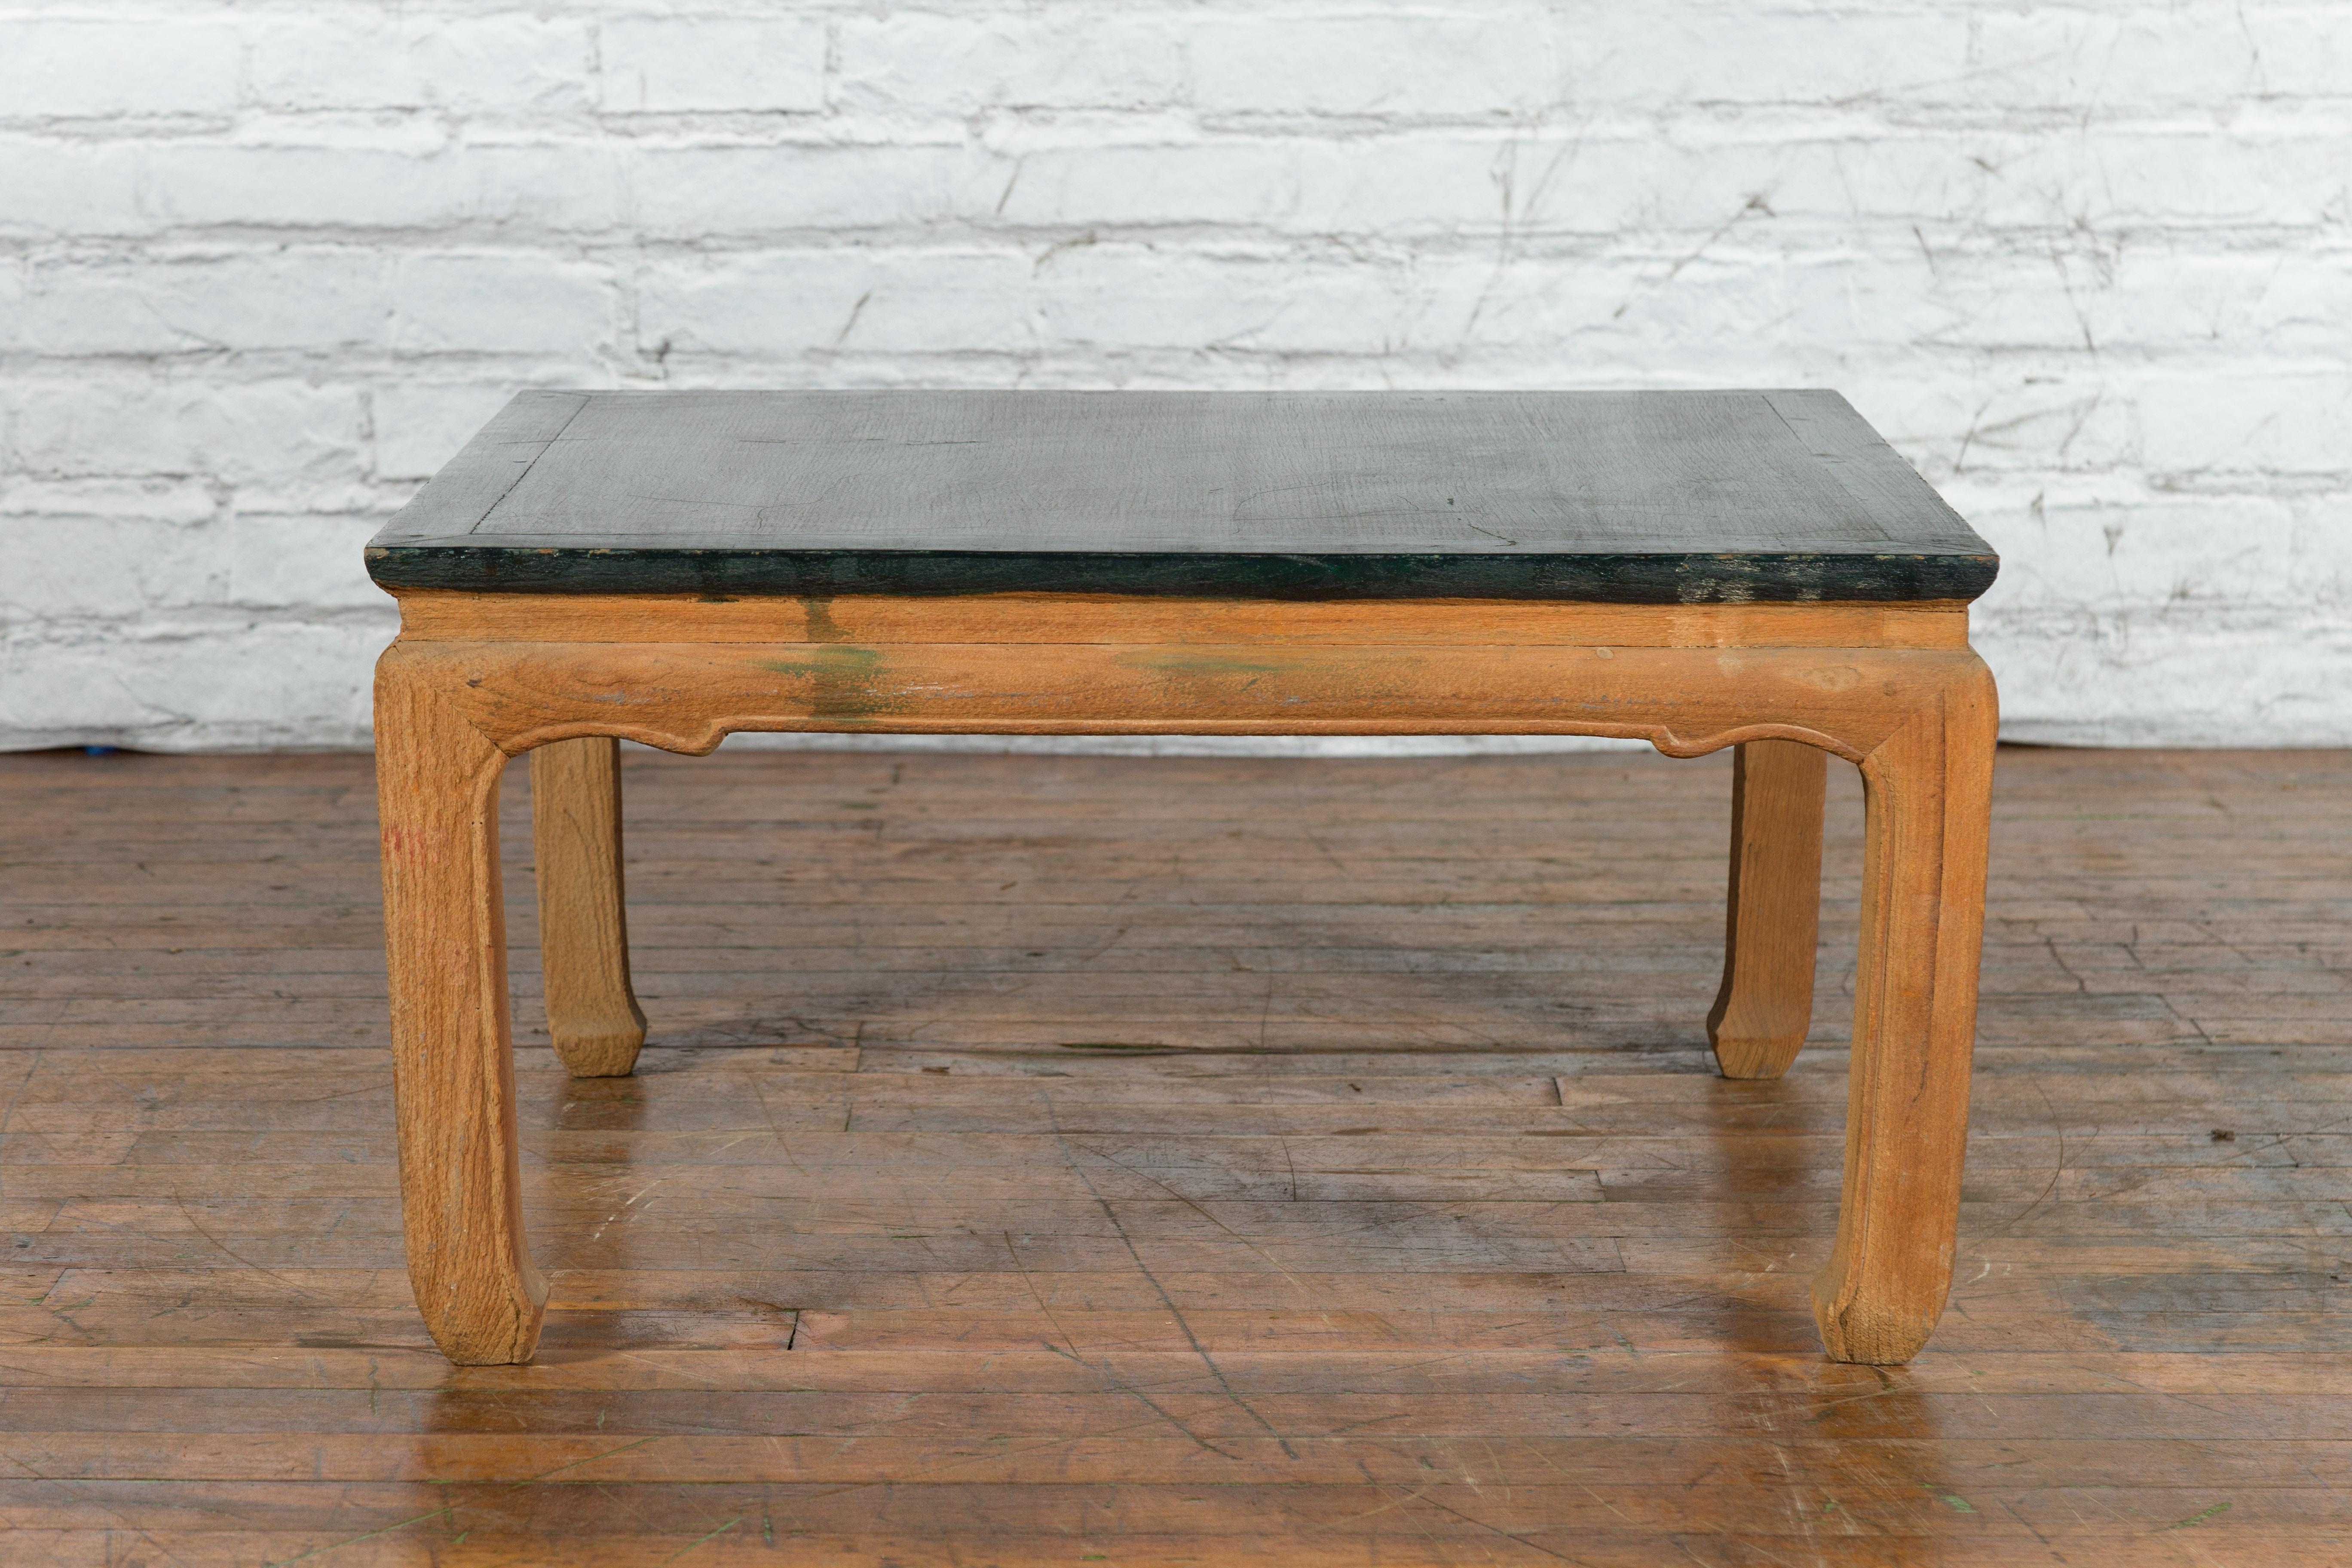 A vintage Chinese Ming Dynasty style low square-shaped coffee table from the mid 20th century with green lacquer top and horse hoof legs. Created in China during the Midcentury period, this Ming style table features a dark green lacquered top with